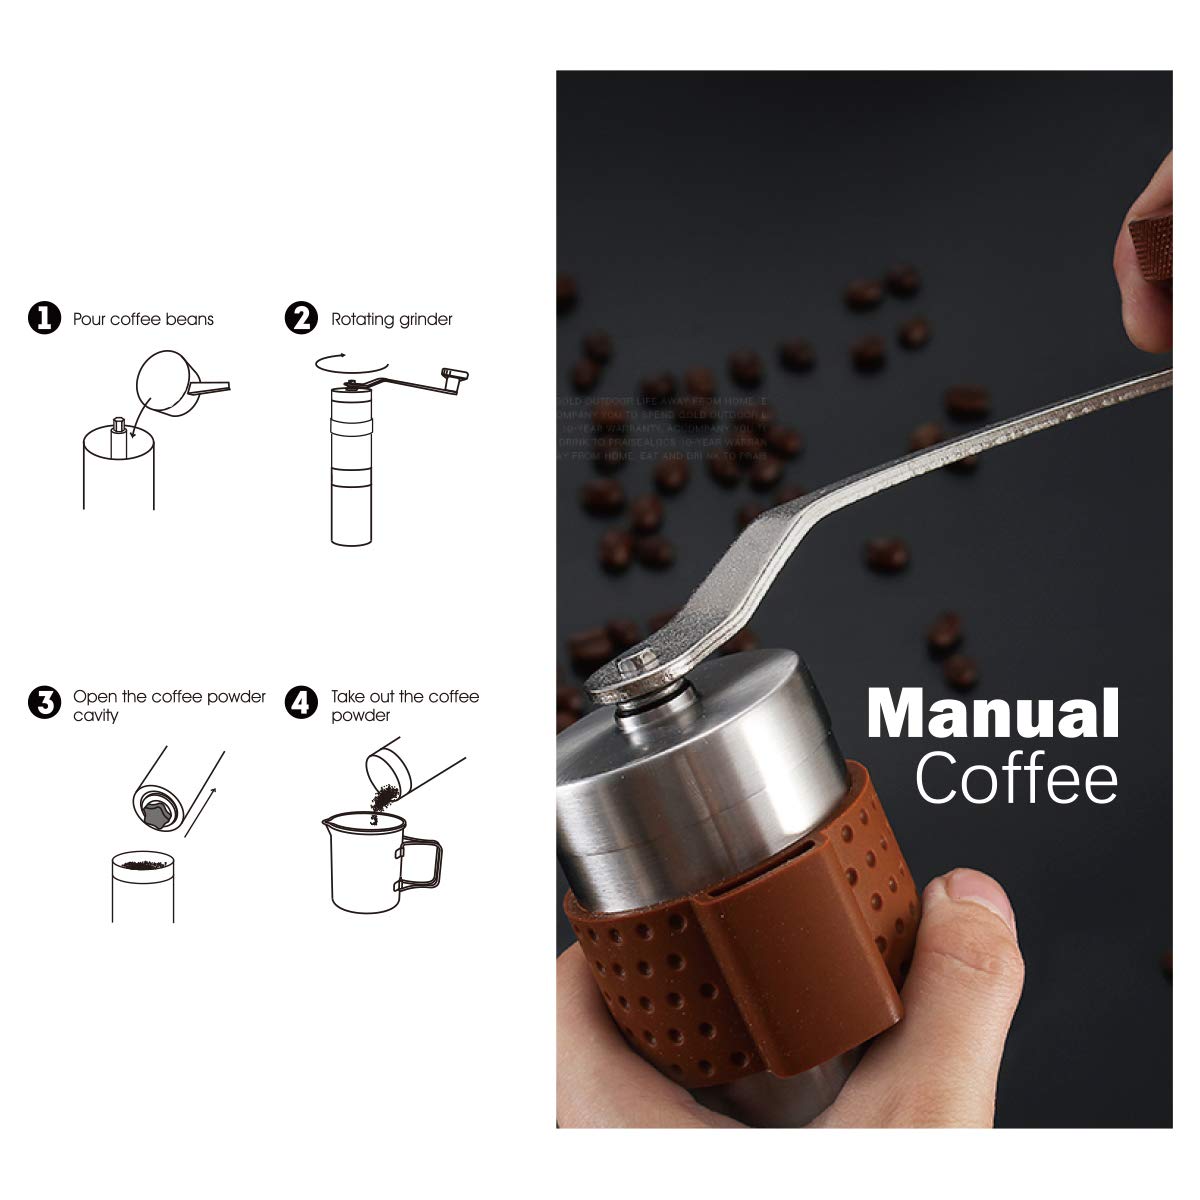 ALOCS Manual Coffee Grinder, Stainless Steel Coffee Bean Grinder, Adjustable Ceramic Conical Burr Coffee Grinder, Portable Coffee Grinders for Home Use, Office, Travel and Camping